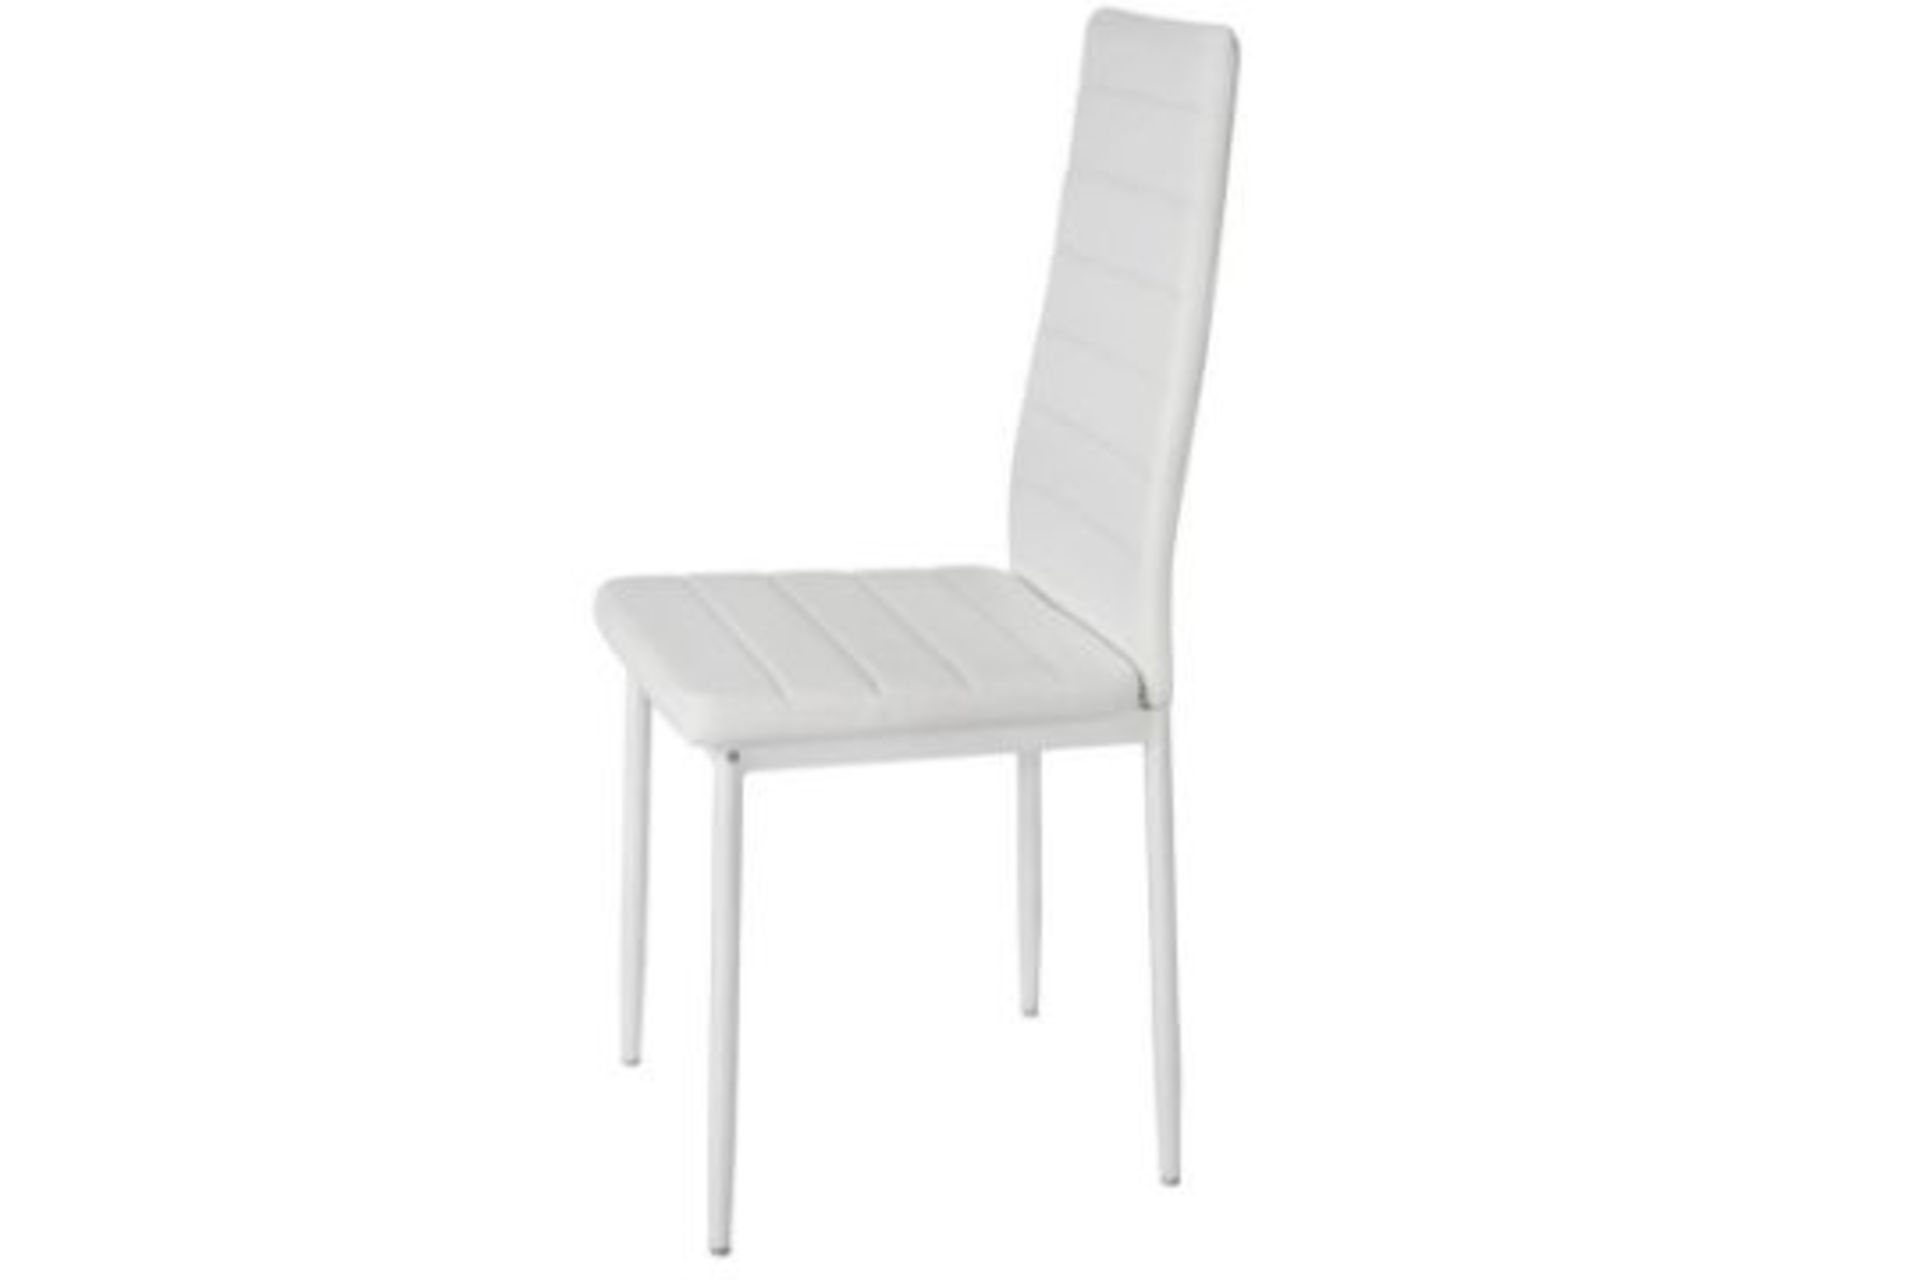 4 X NEW BOXED Modern Synthetic Leather Dining Chairs In White. RRP £99.99 each, giving this lot a - Image 2 of 4